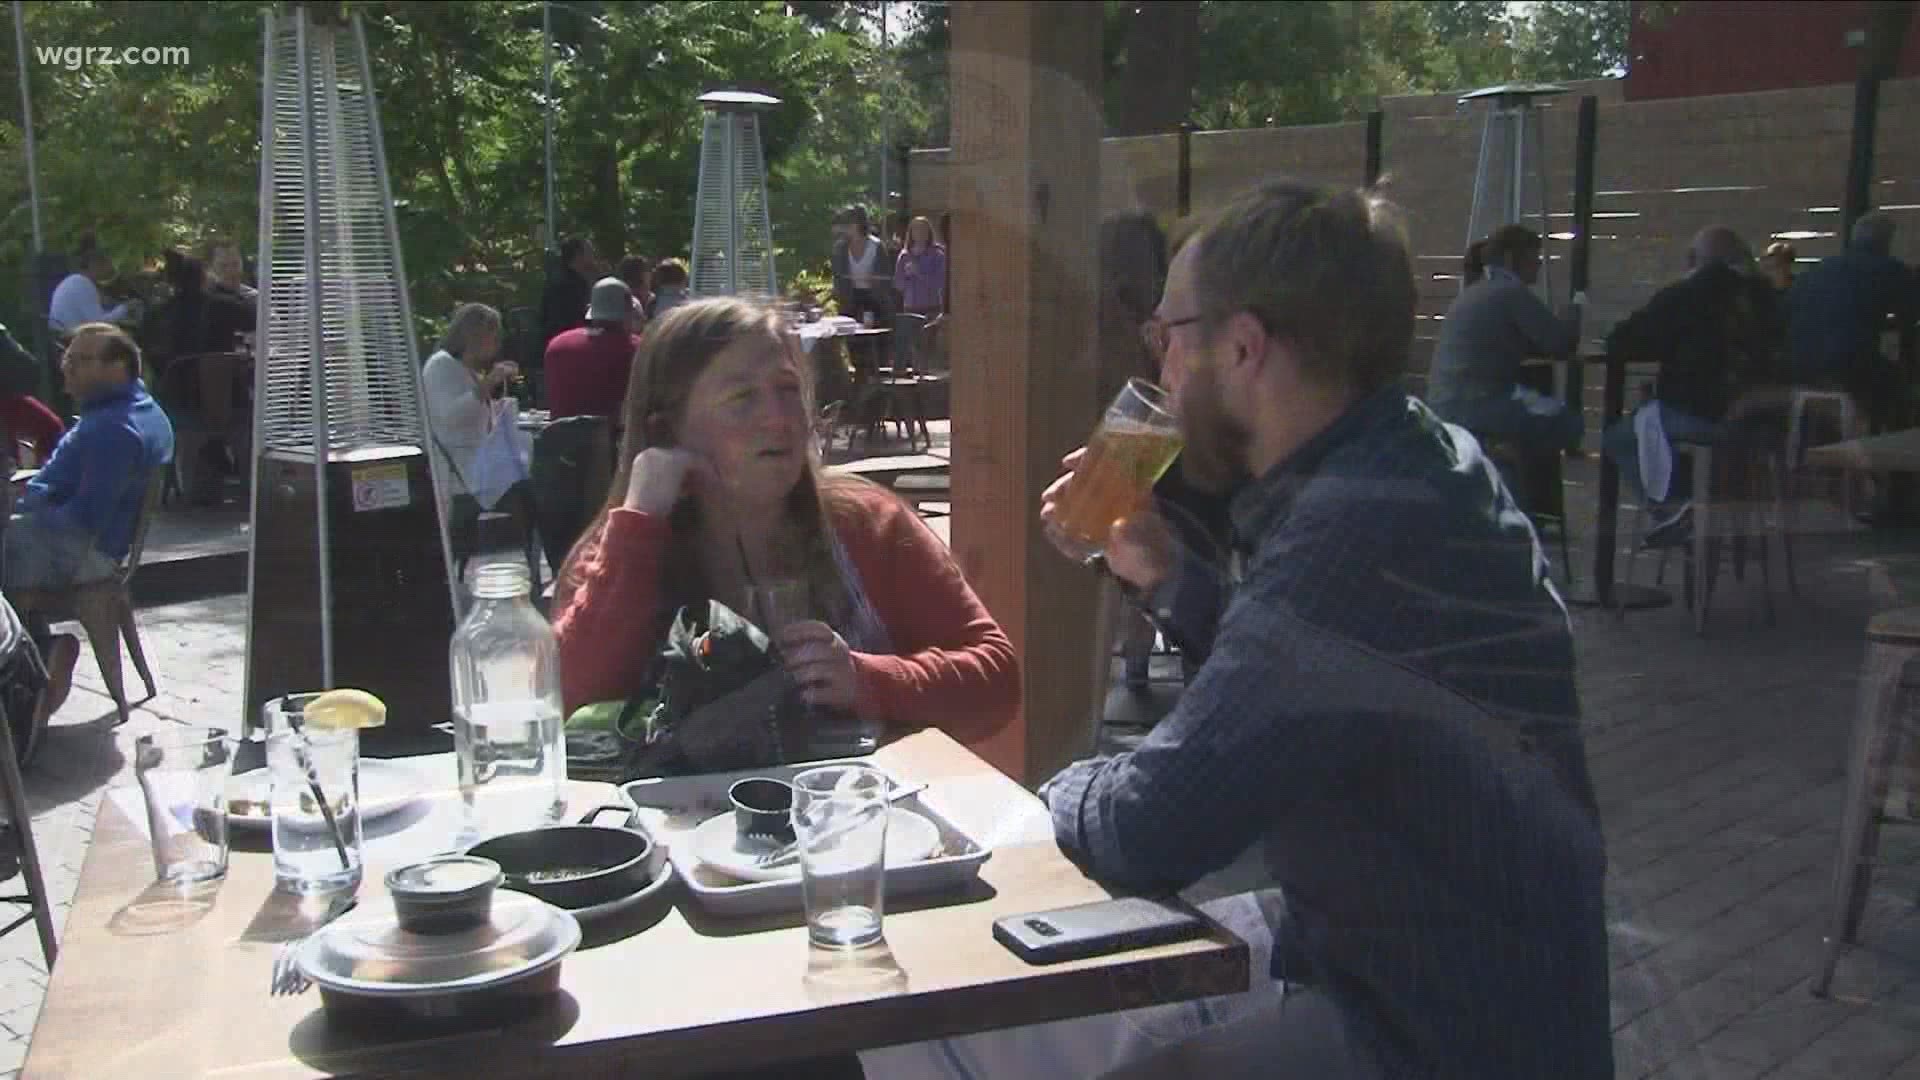 The town of Amherst is expanding its outdoor dining season through the end of the year to help restaurants after the pandemic hit them hard financially.